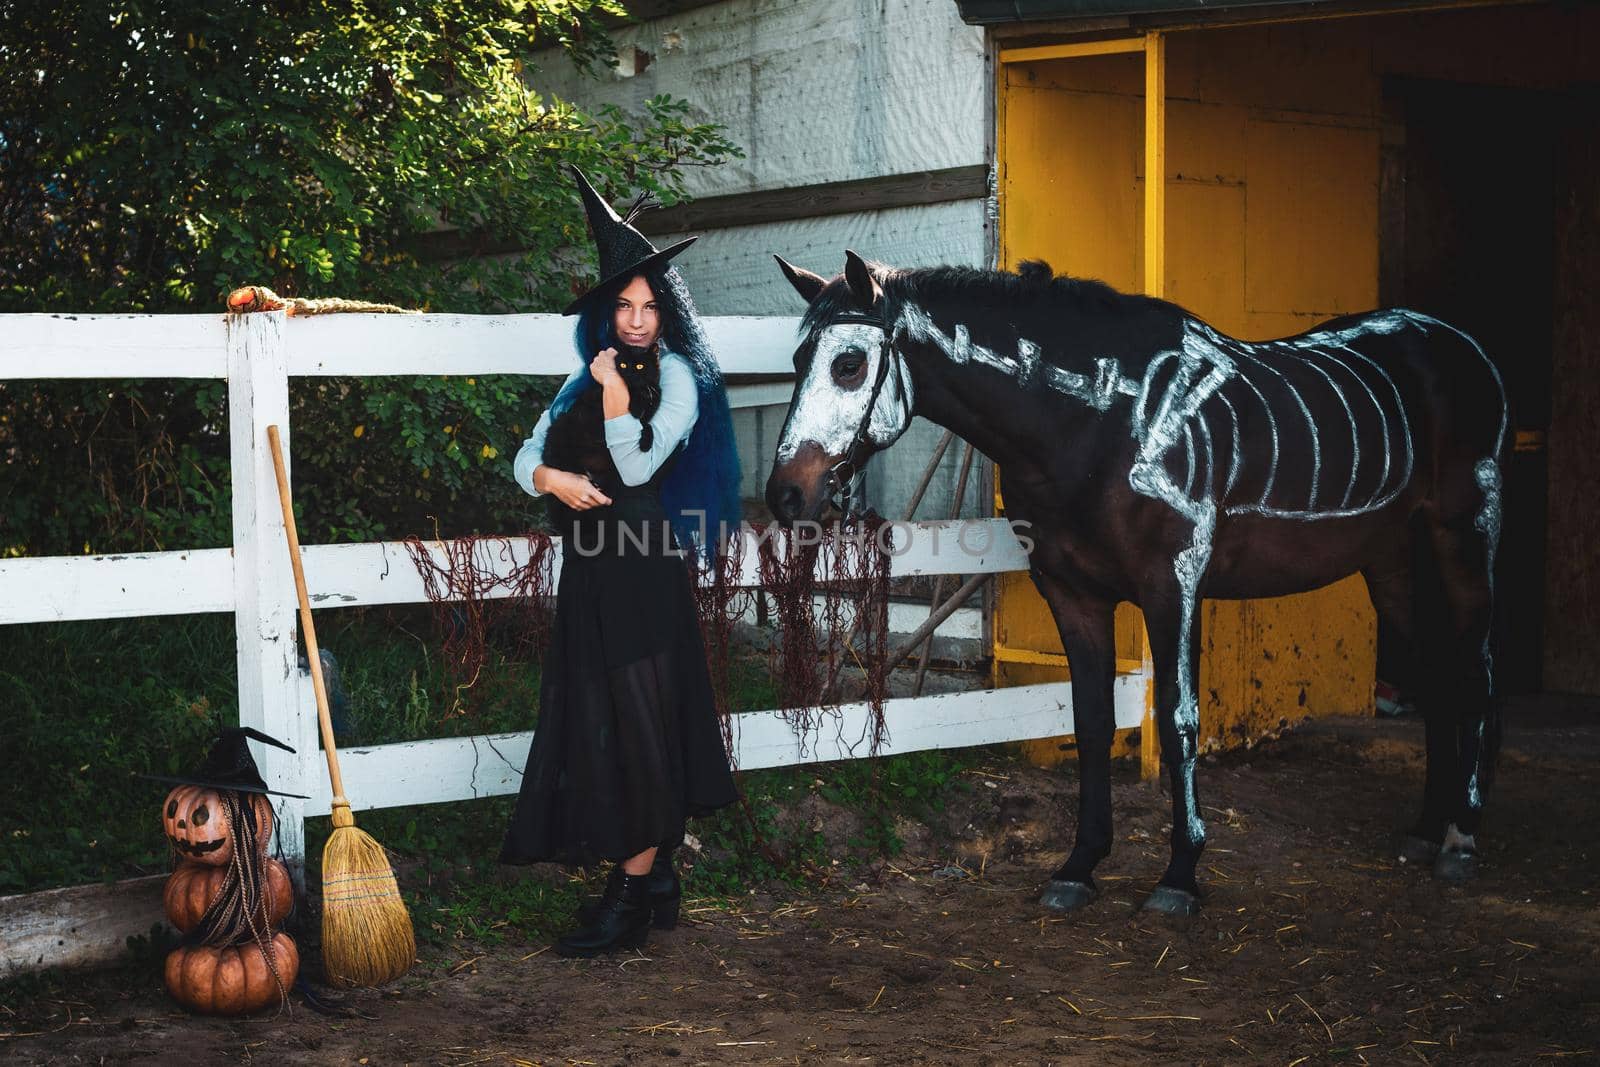 A girl dressed as a witch on a halloween party holds a black cat in her arms and stands by a corral on a farm next to a horse